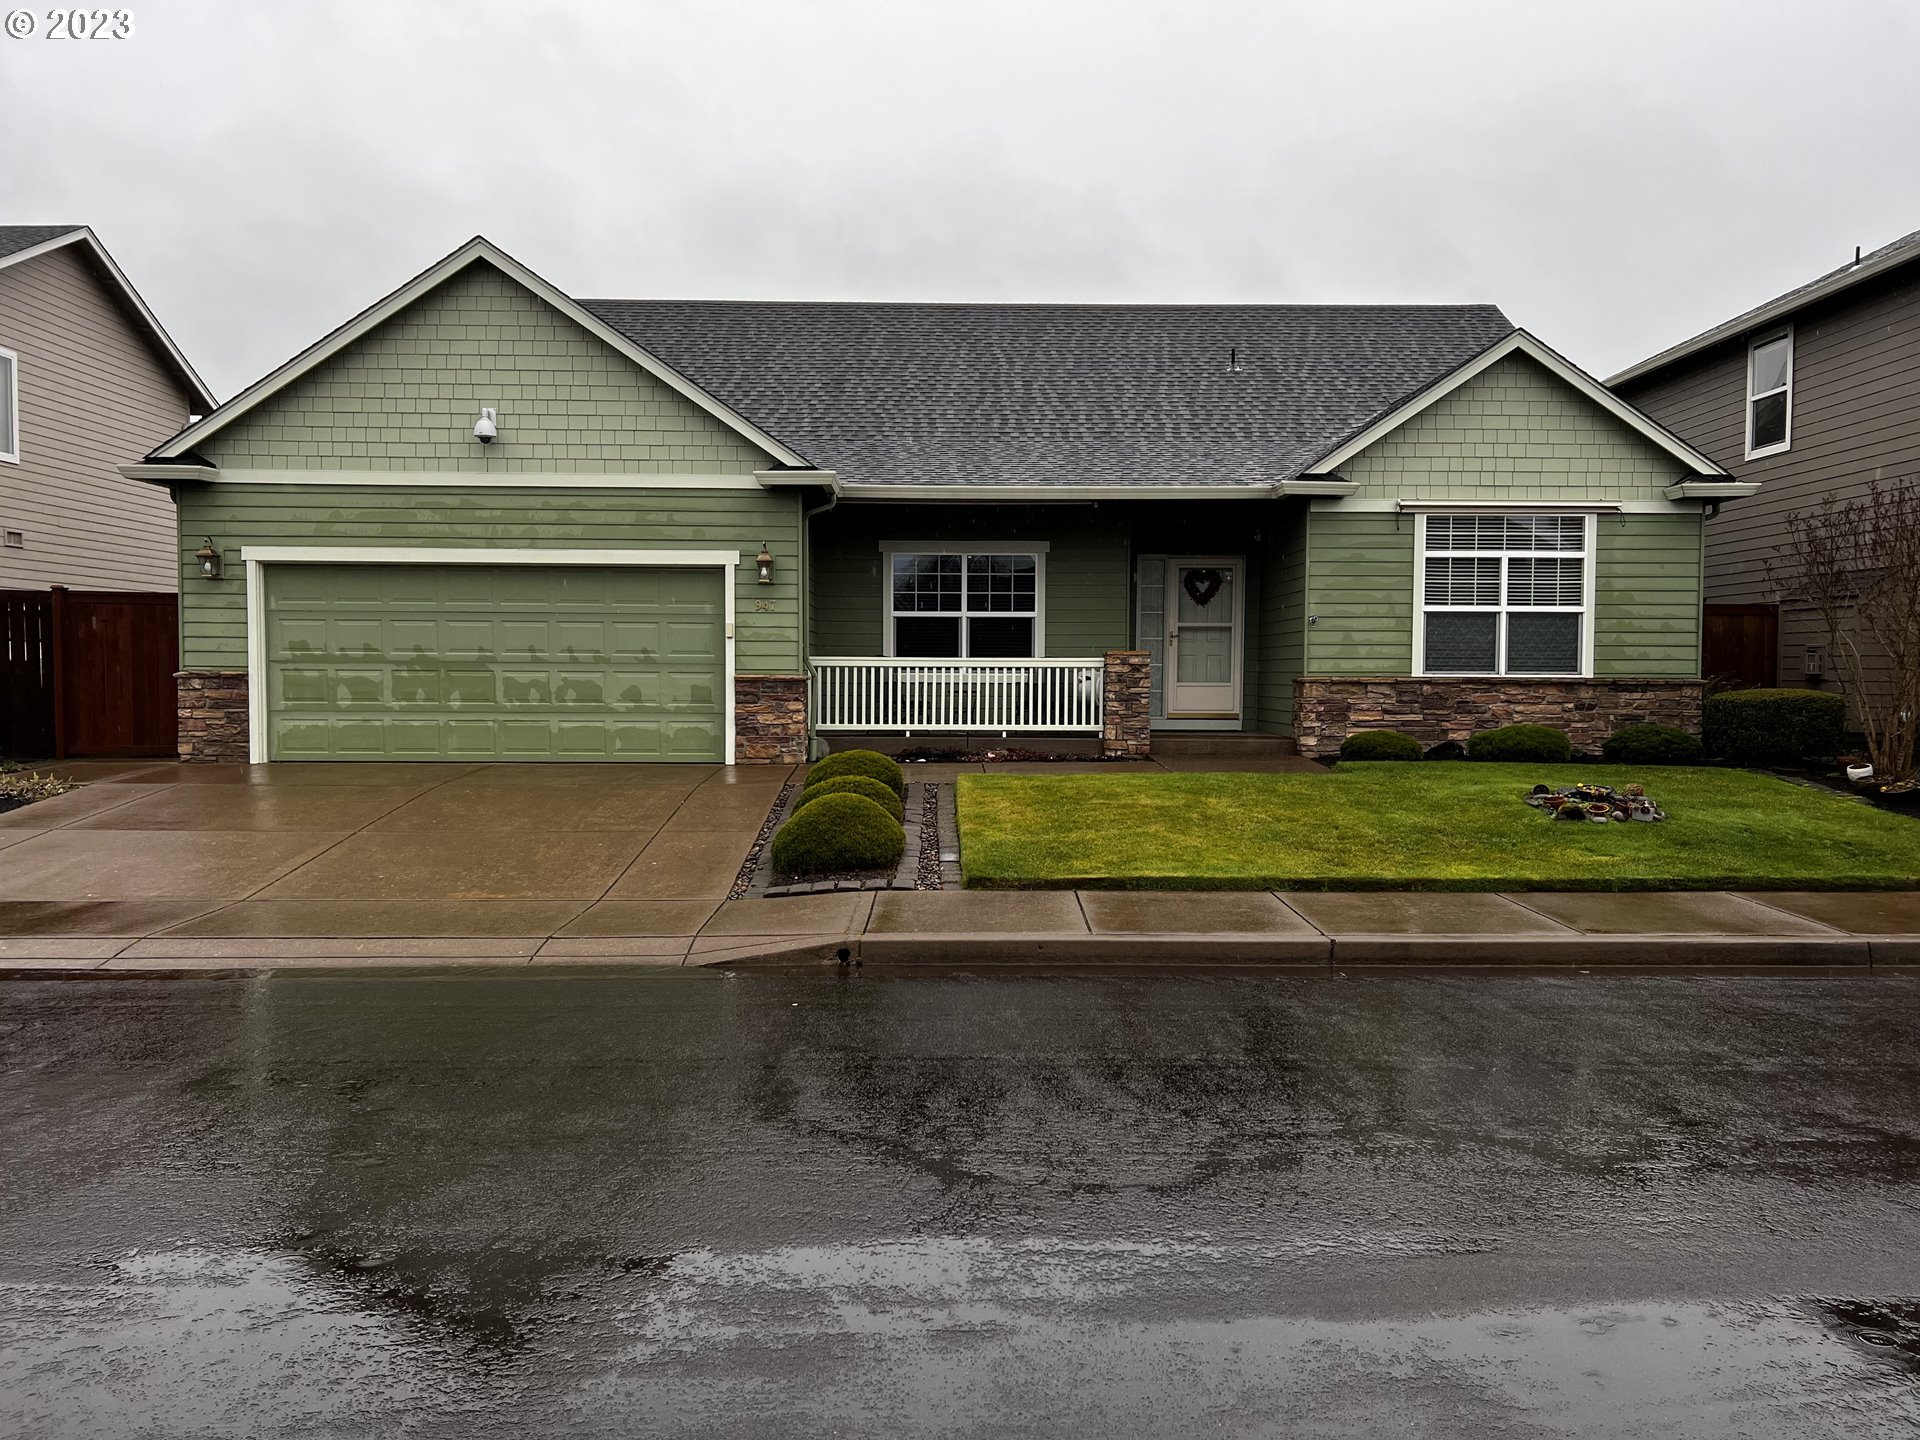 947 67TH PL, Springfield, OR 97478